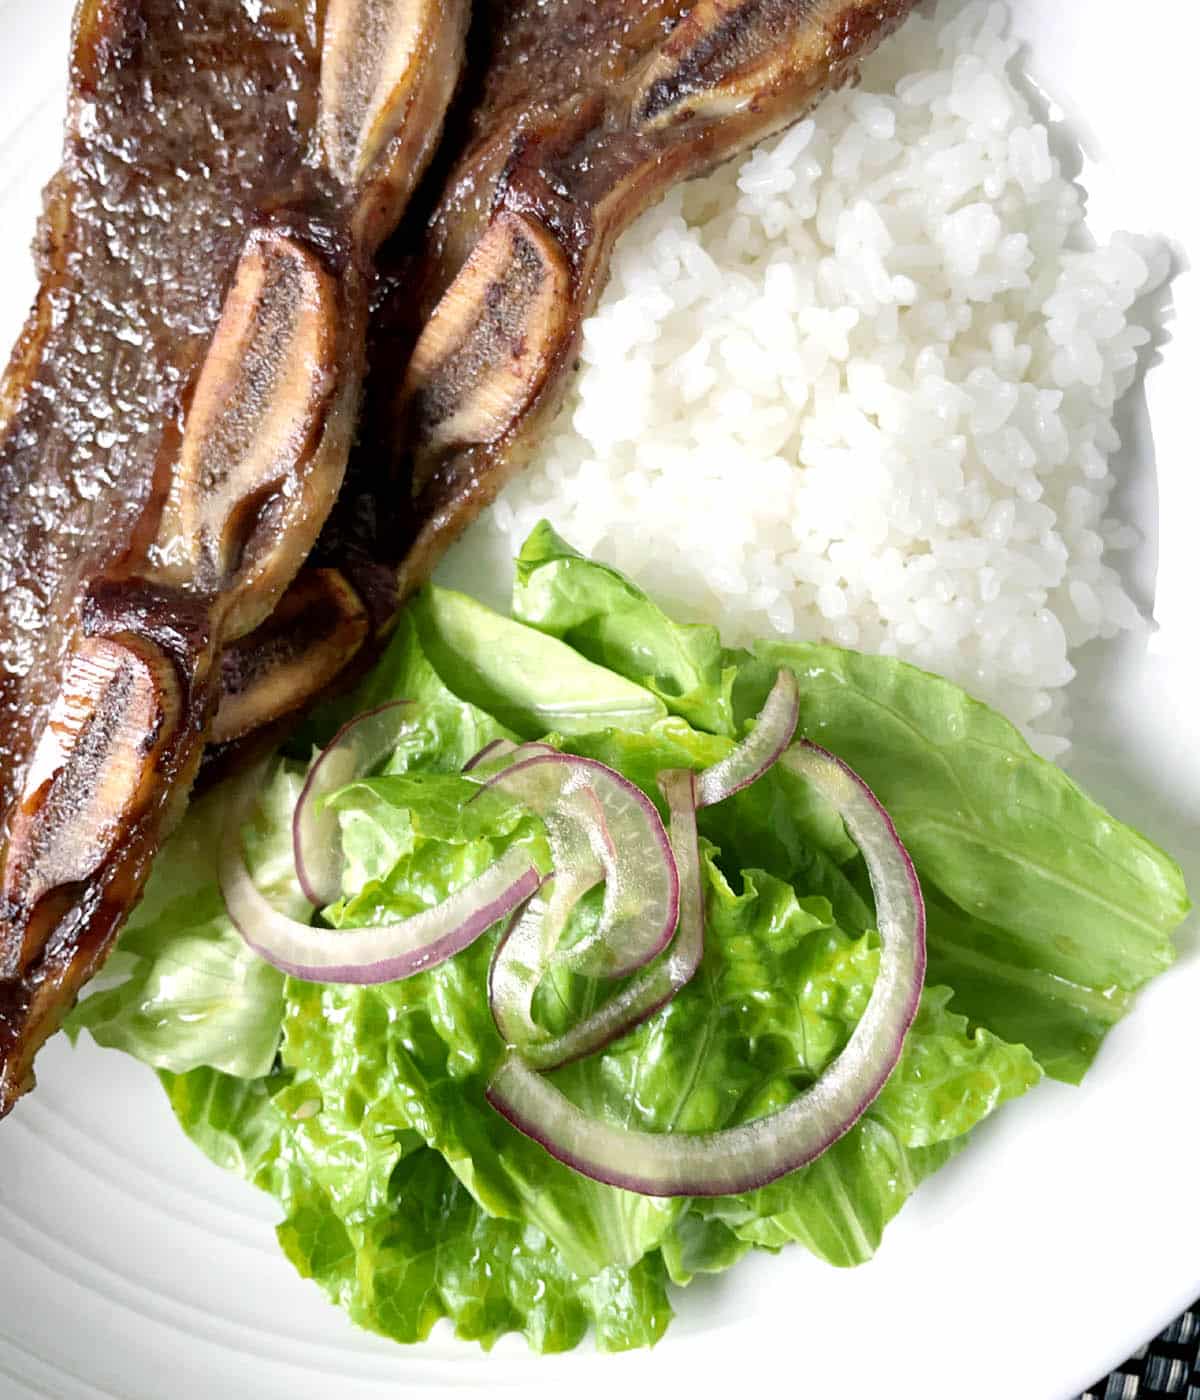 A white plate containing white rice, cooked beef ribs, green lettuce leaves and thinly sliced red onion.